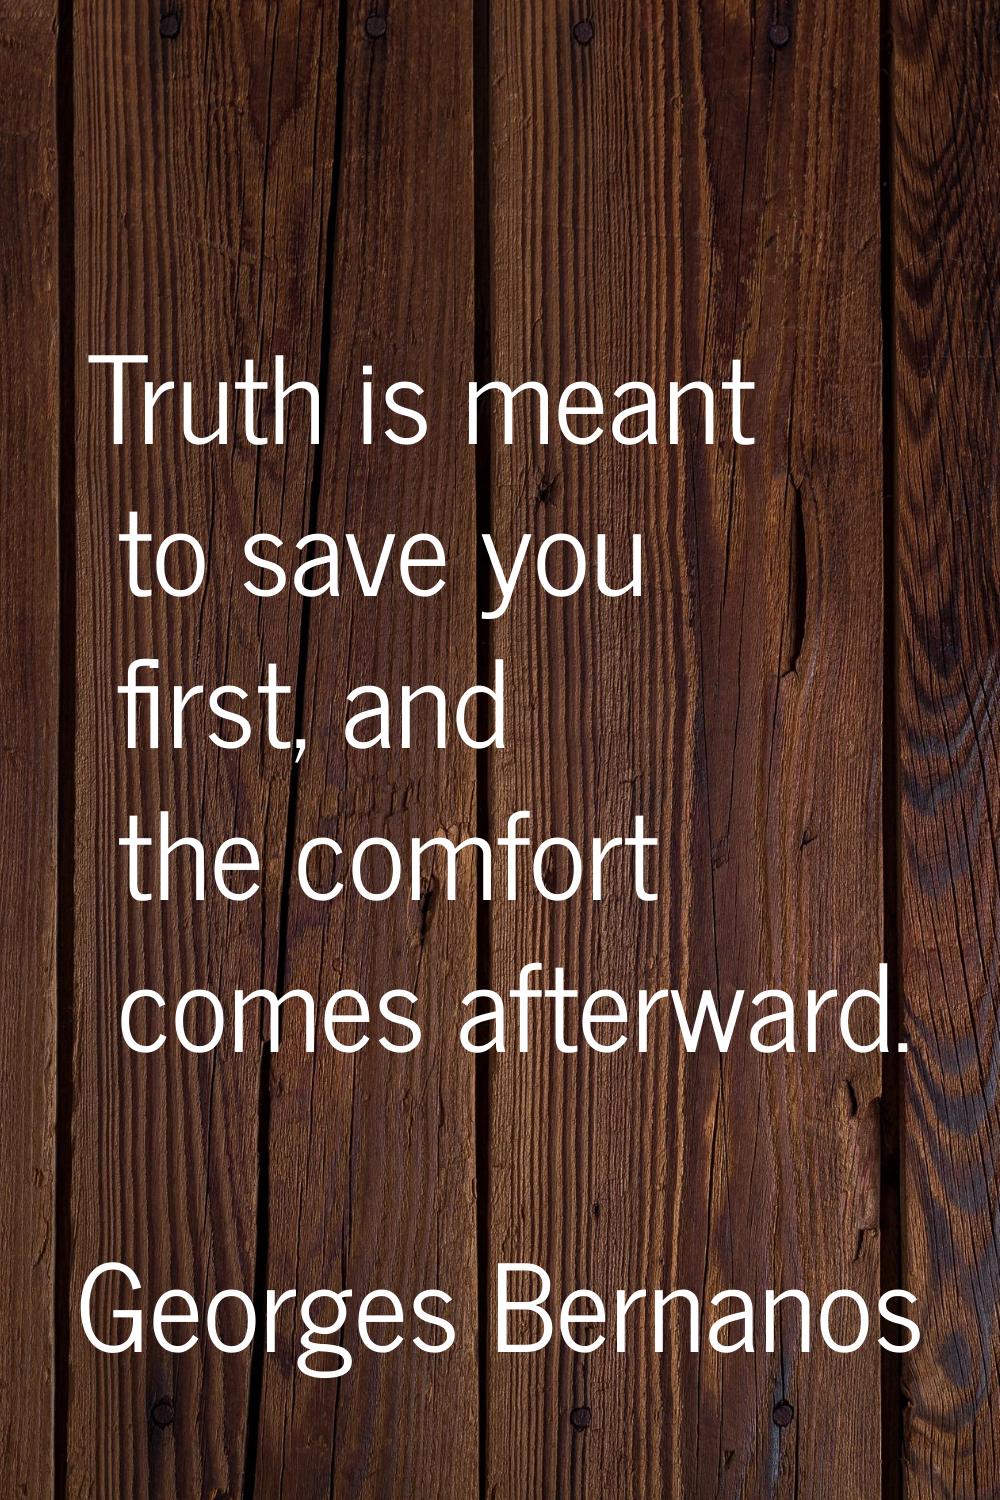 Truth is meant to save you first, and the comfort comes afterward.